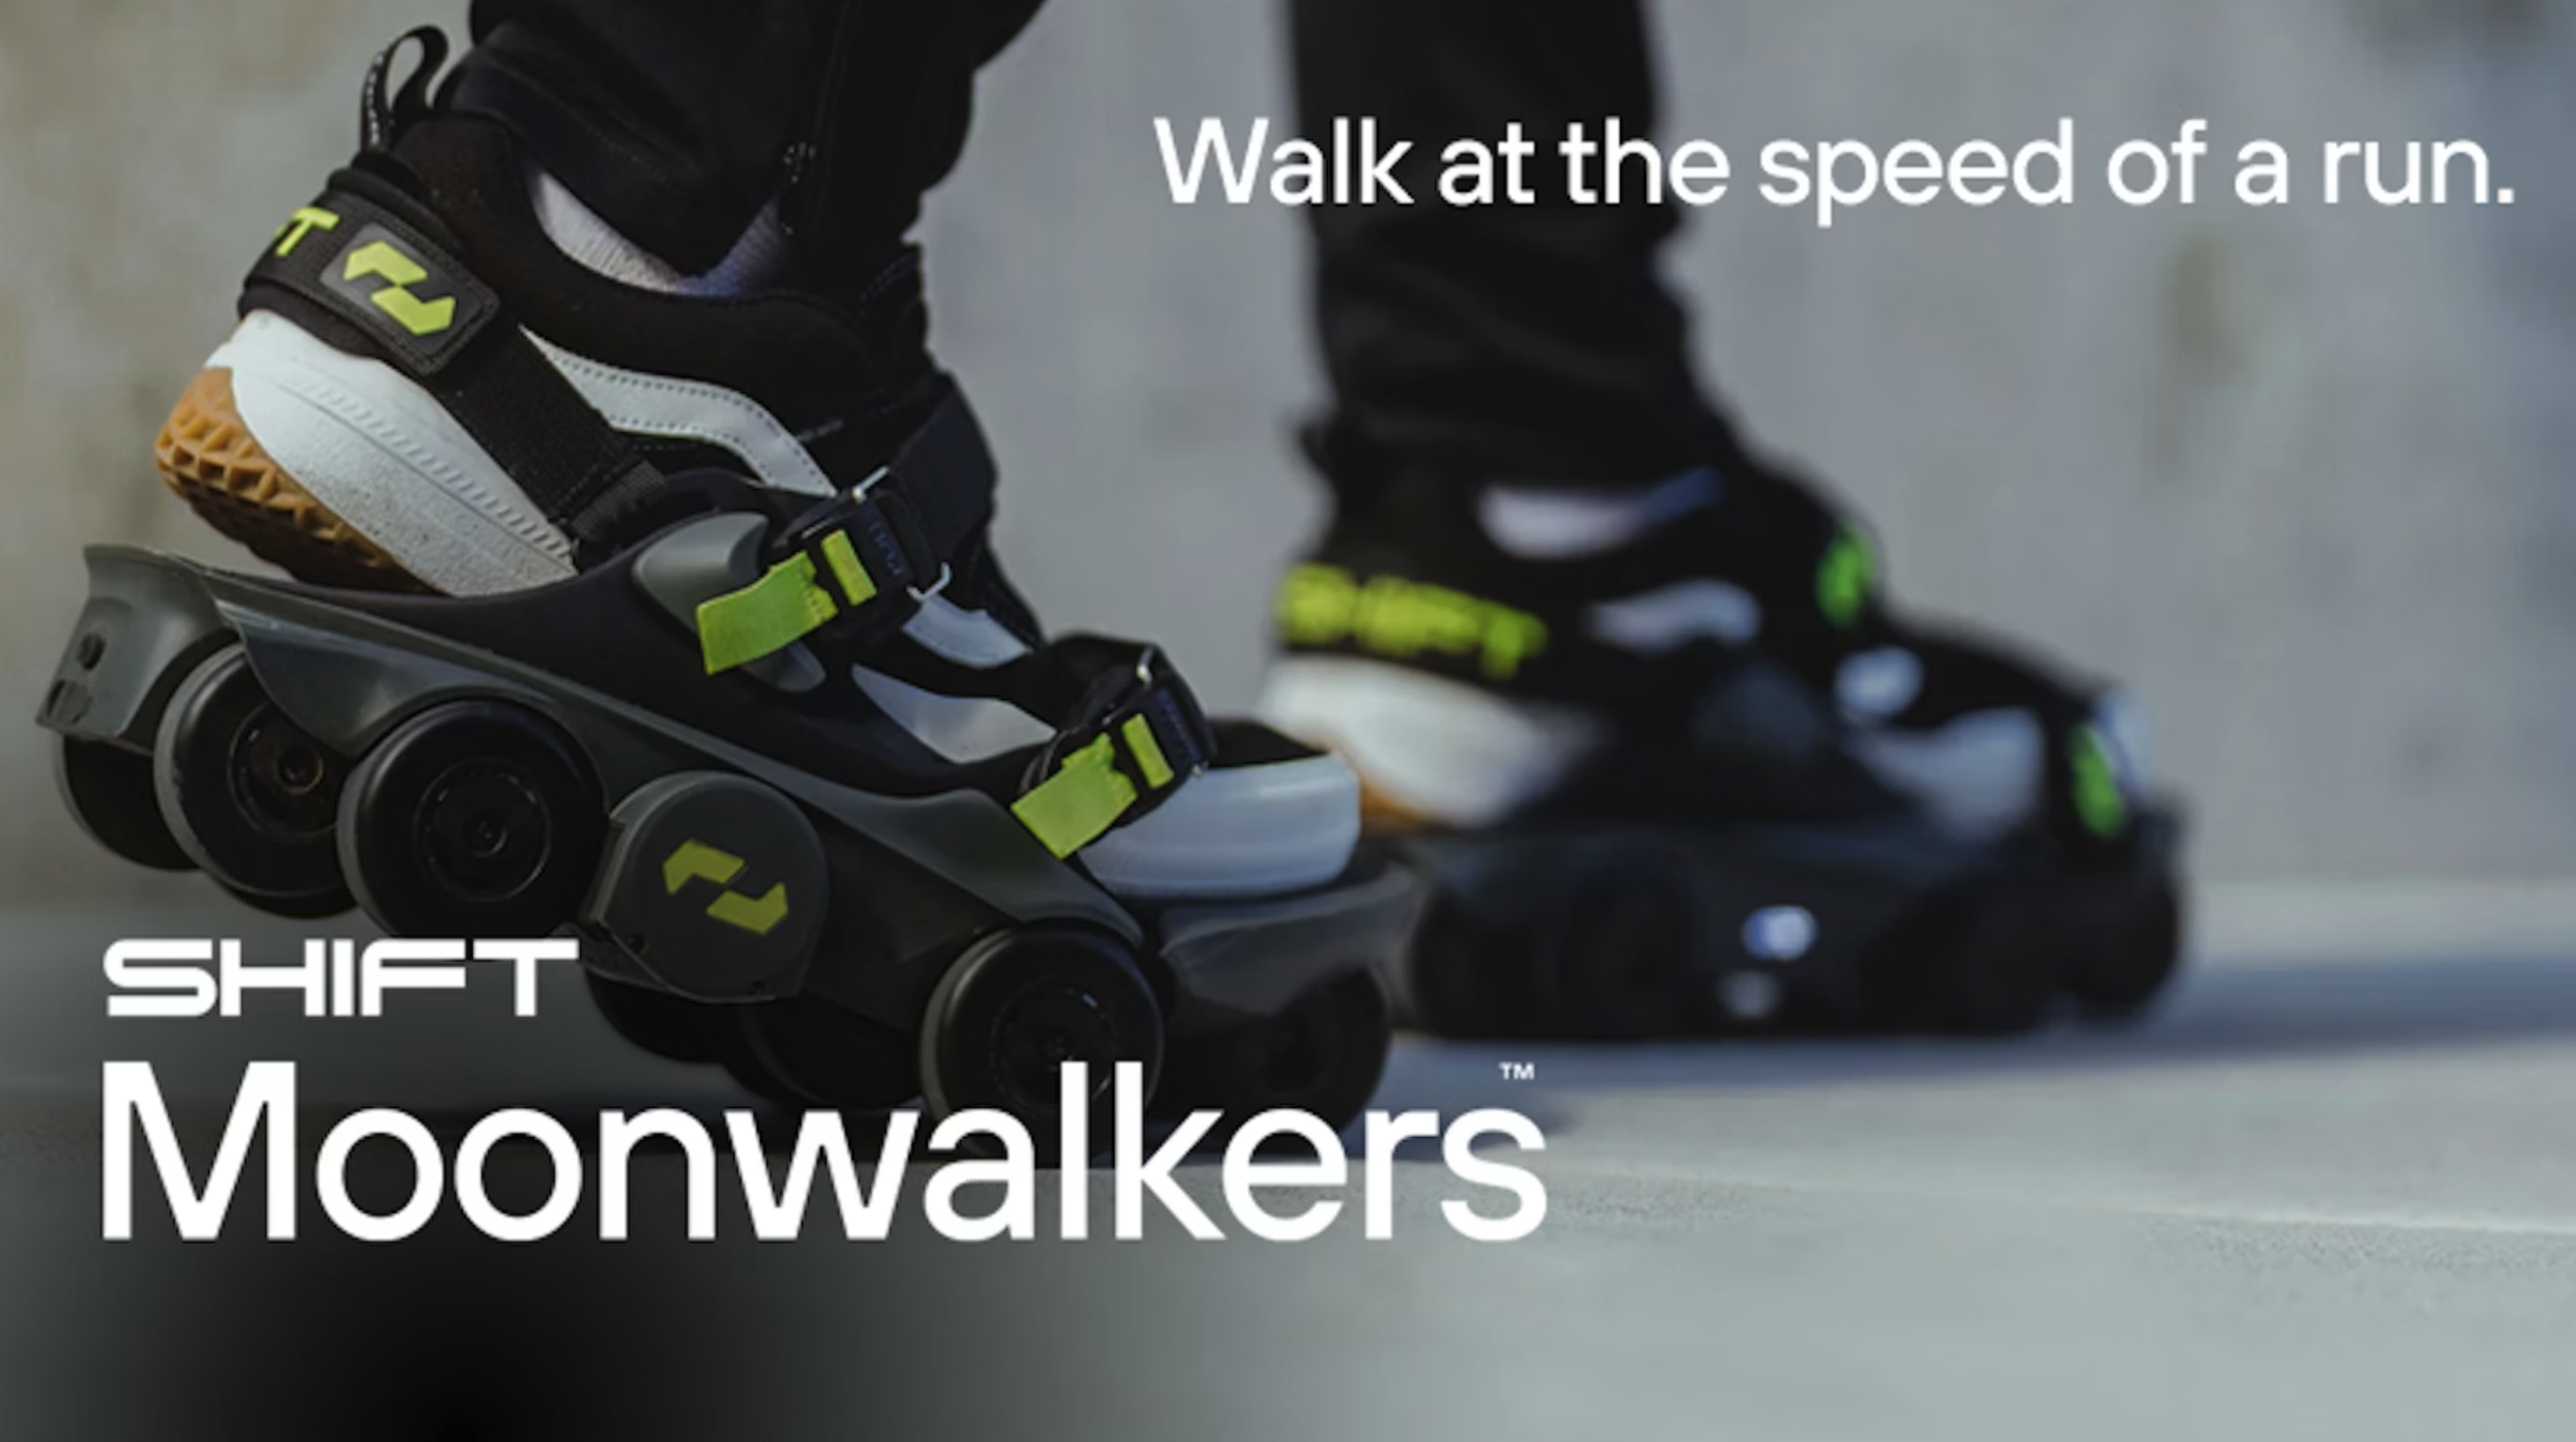 Image of Moonwalkers electric shoes from YG Crowdfunding Kickstarter campaign